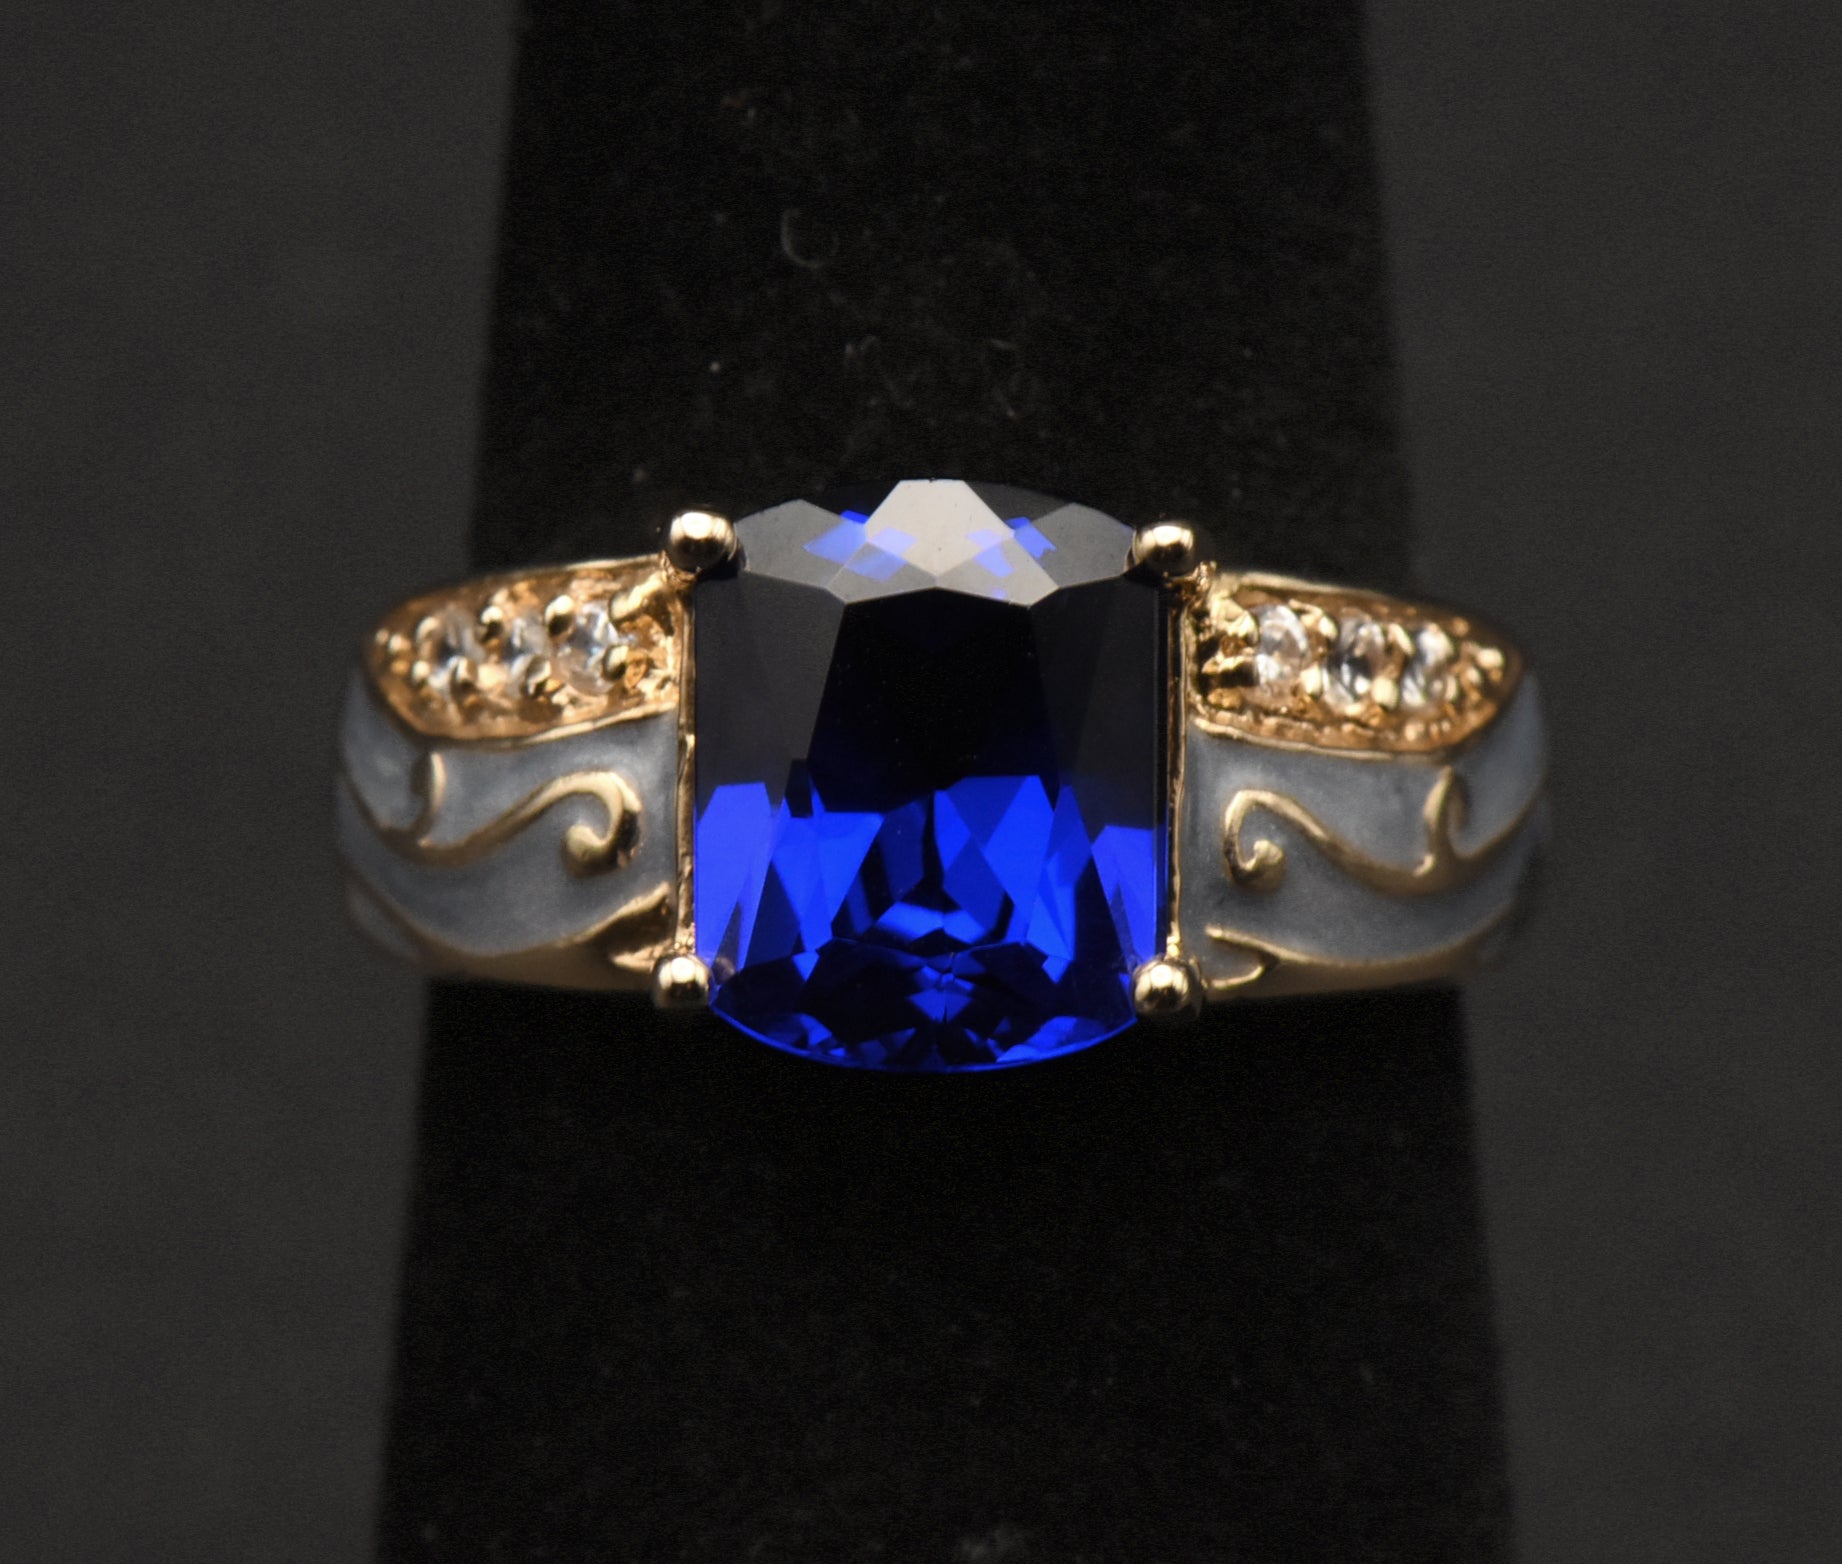 Ross-Simons - Vintage Synthetic Blue Spinel Vermeil Ring - Size 6